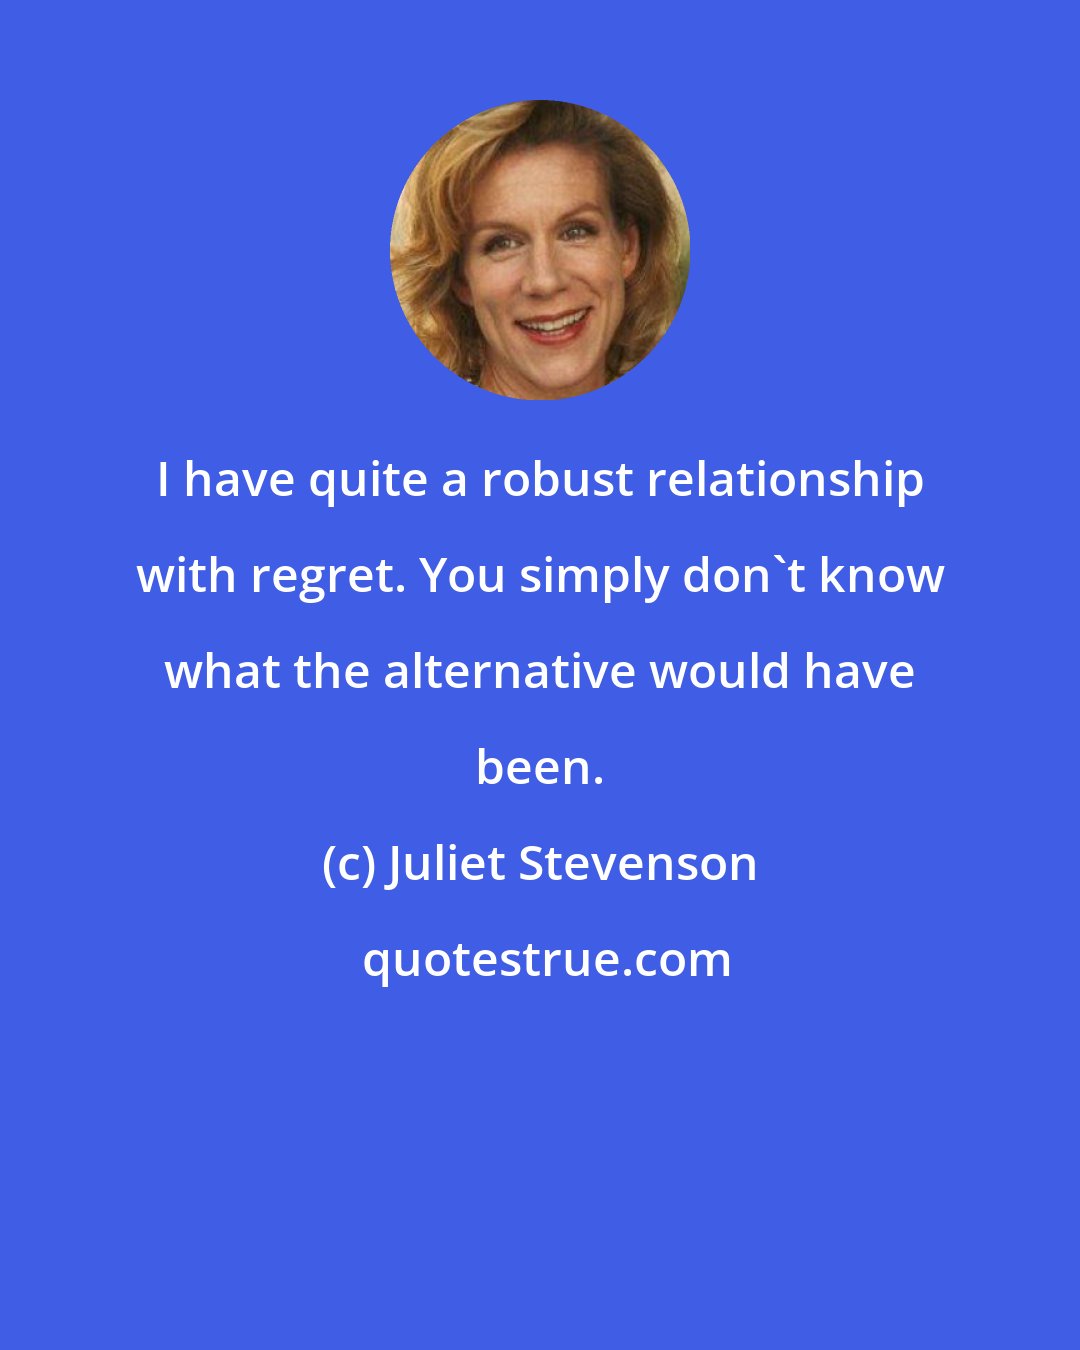 Juliet Stevenson: I have quite a robust relationship with regret. You simply don't know what the alternative would have been.